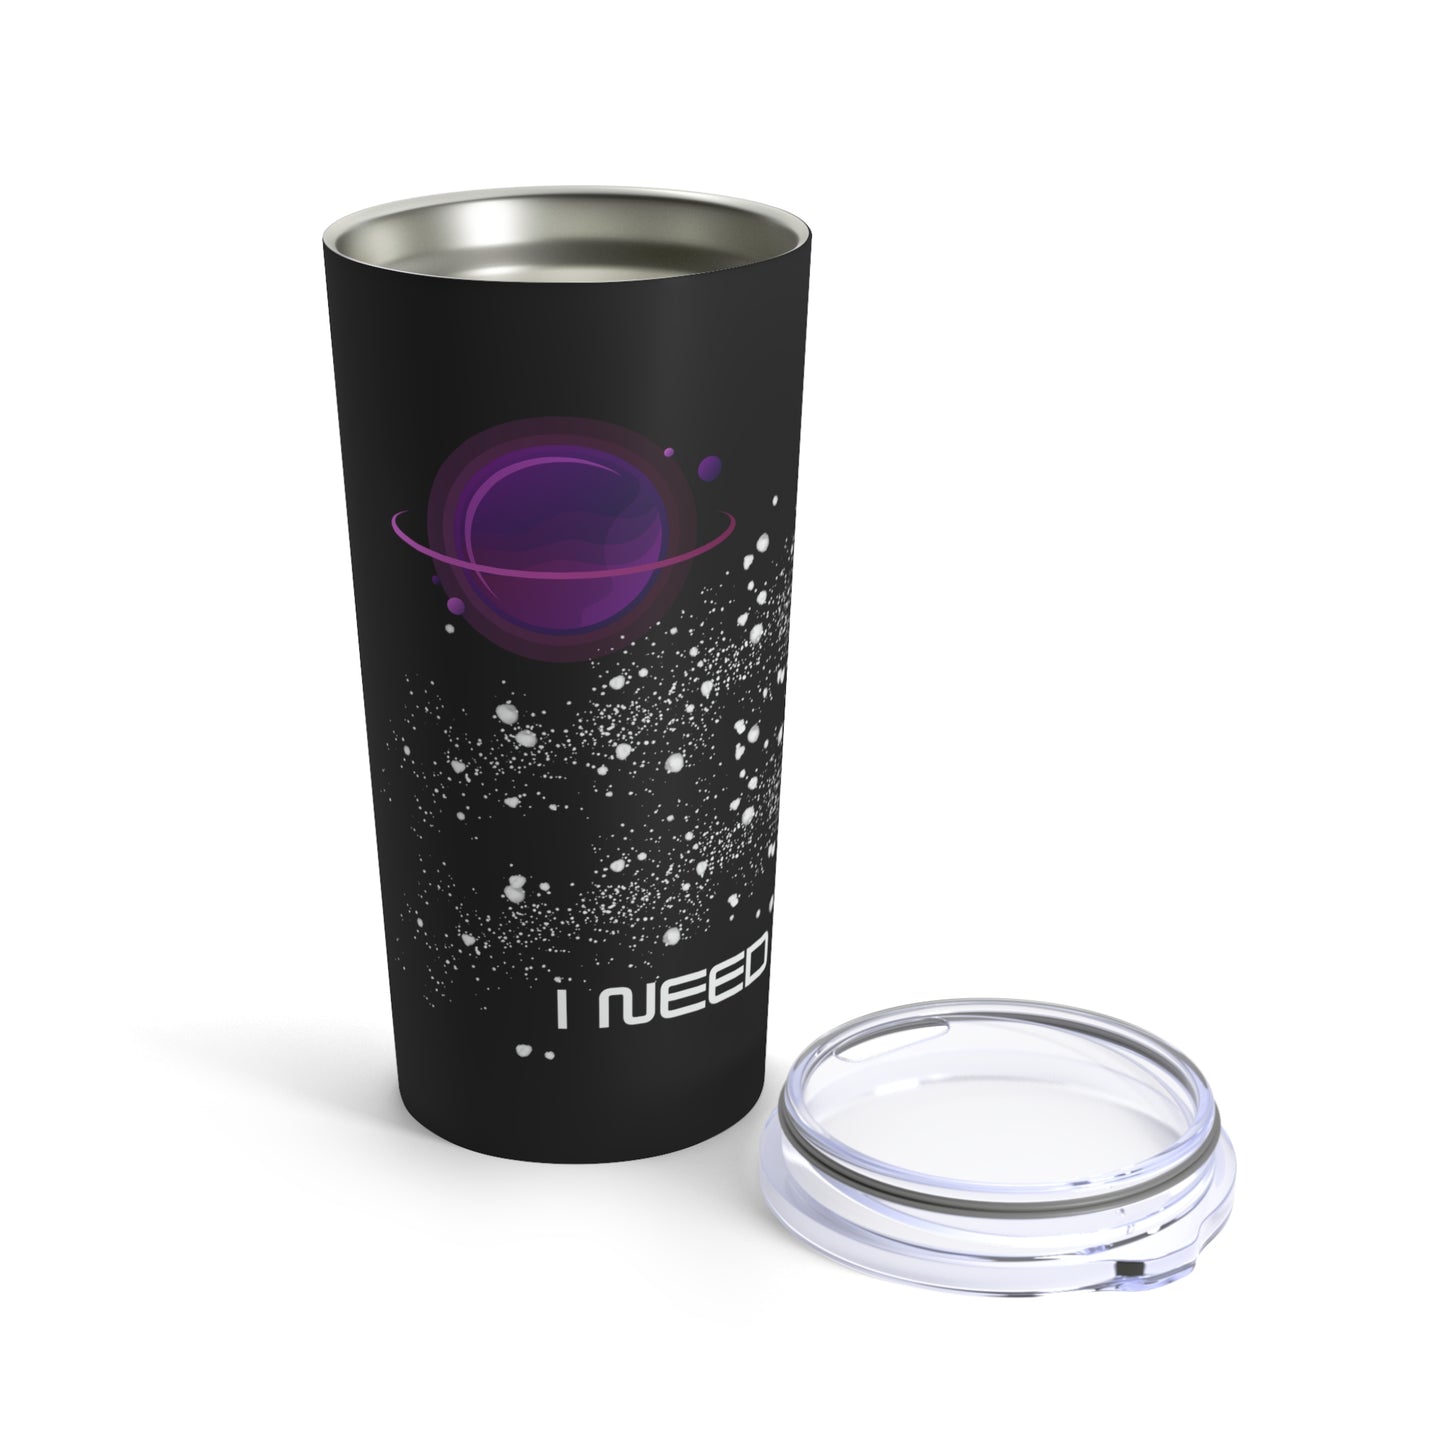 20 oz Space Tumbler Stainless Steel Insulated Galaxy Tumbler Astronomy Gift Galactic Mug Space Gifts For Men Motivational Tumbler